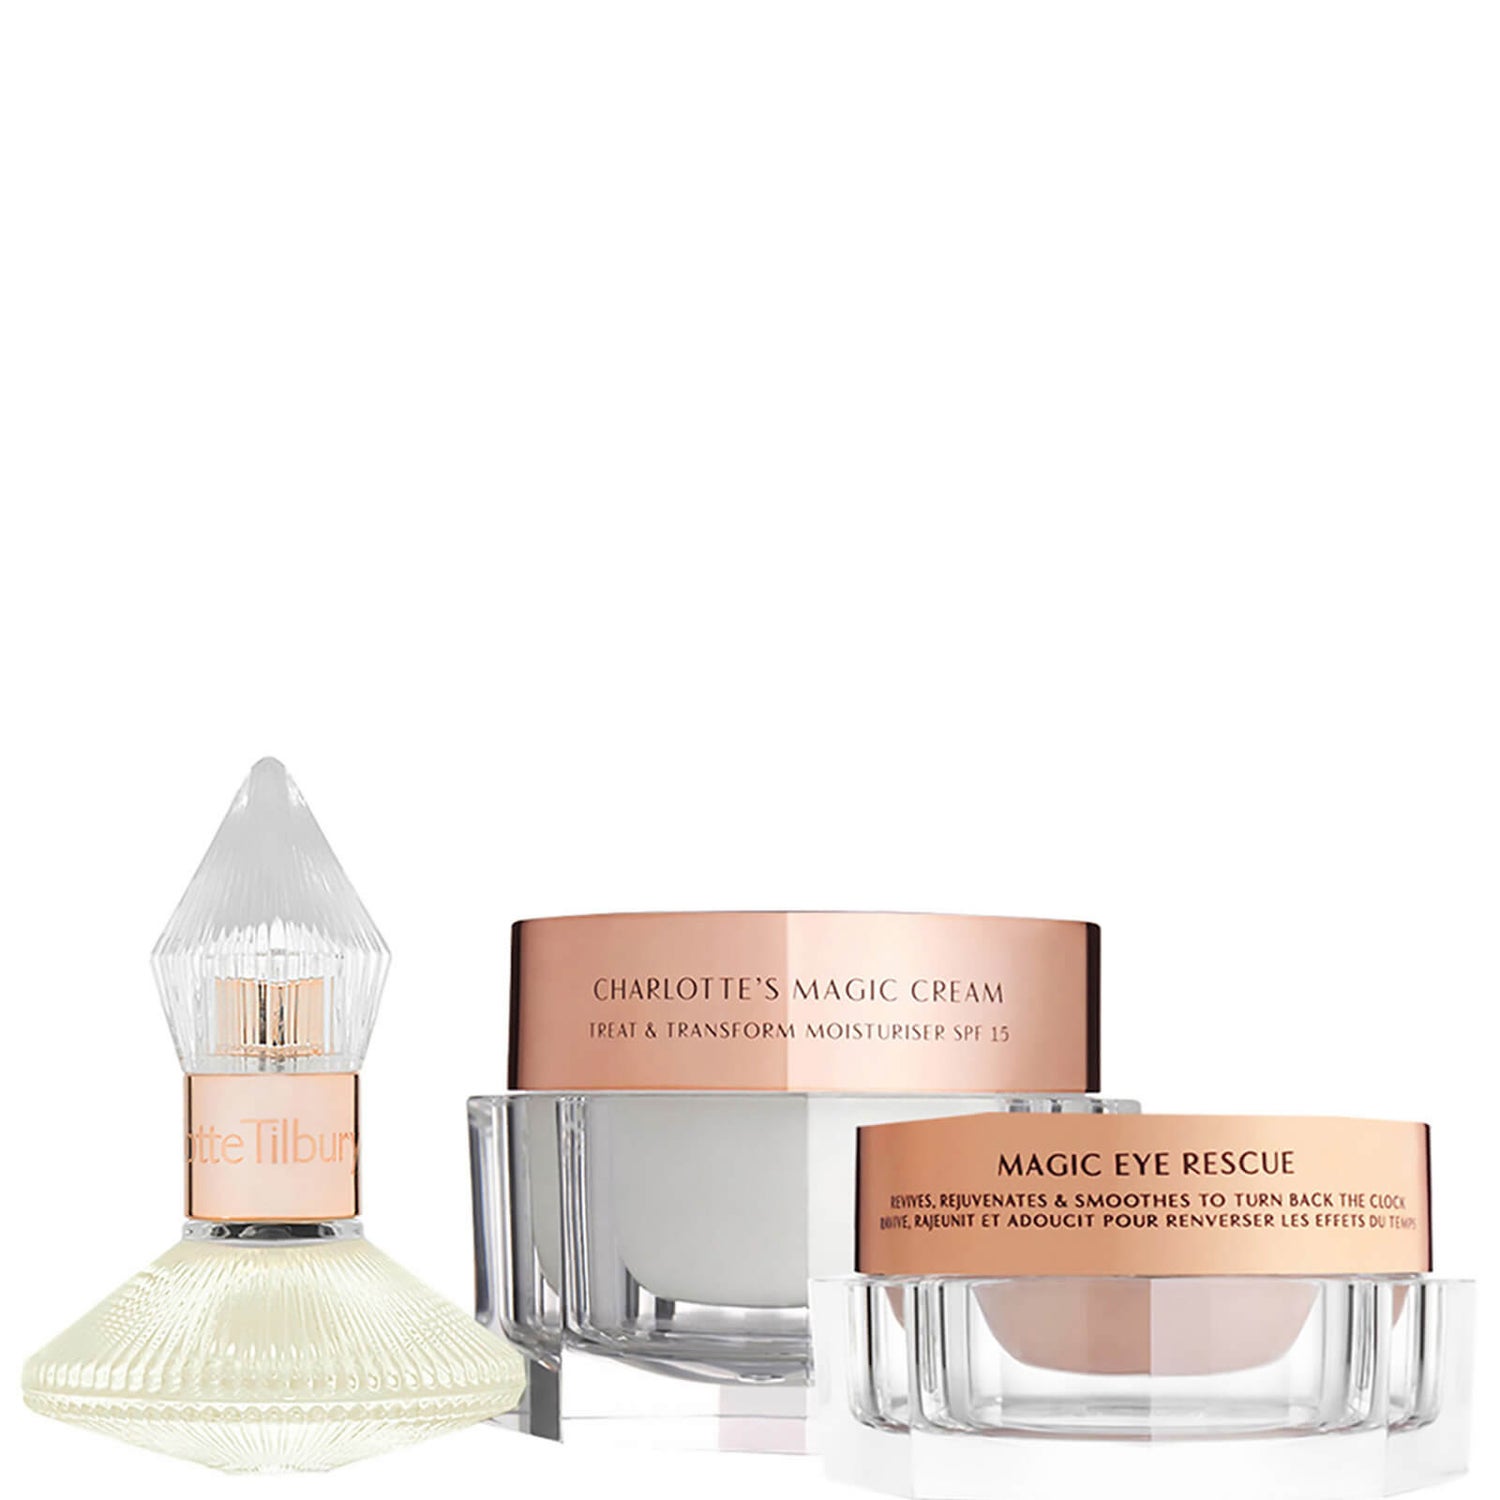 Charlotte Tilbury Dewy, Glowing Skin Duo with Bonus Scent of a Dream